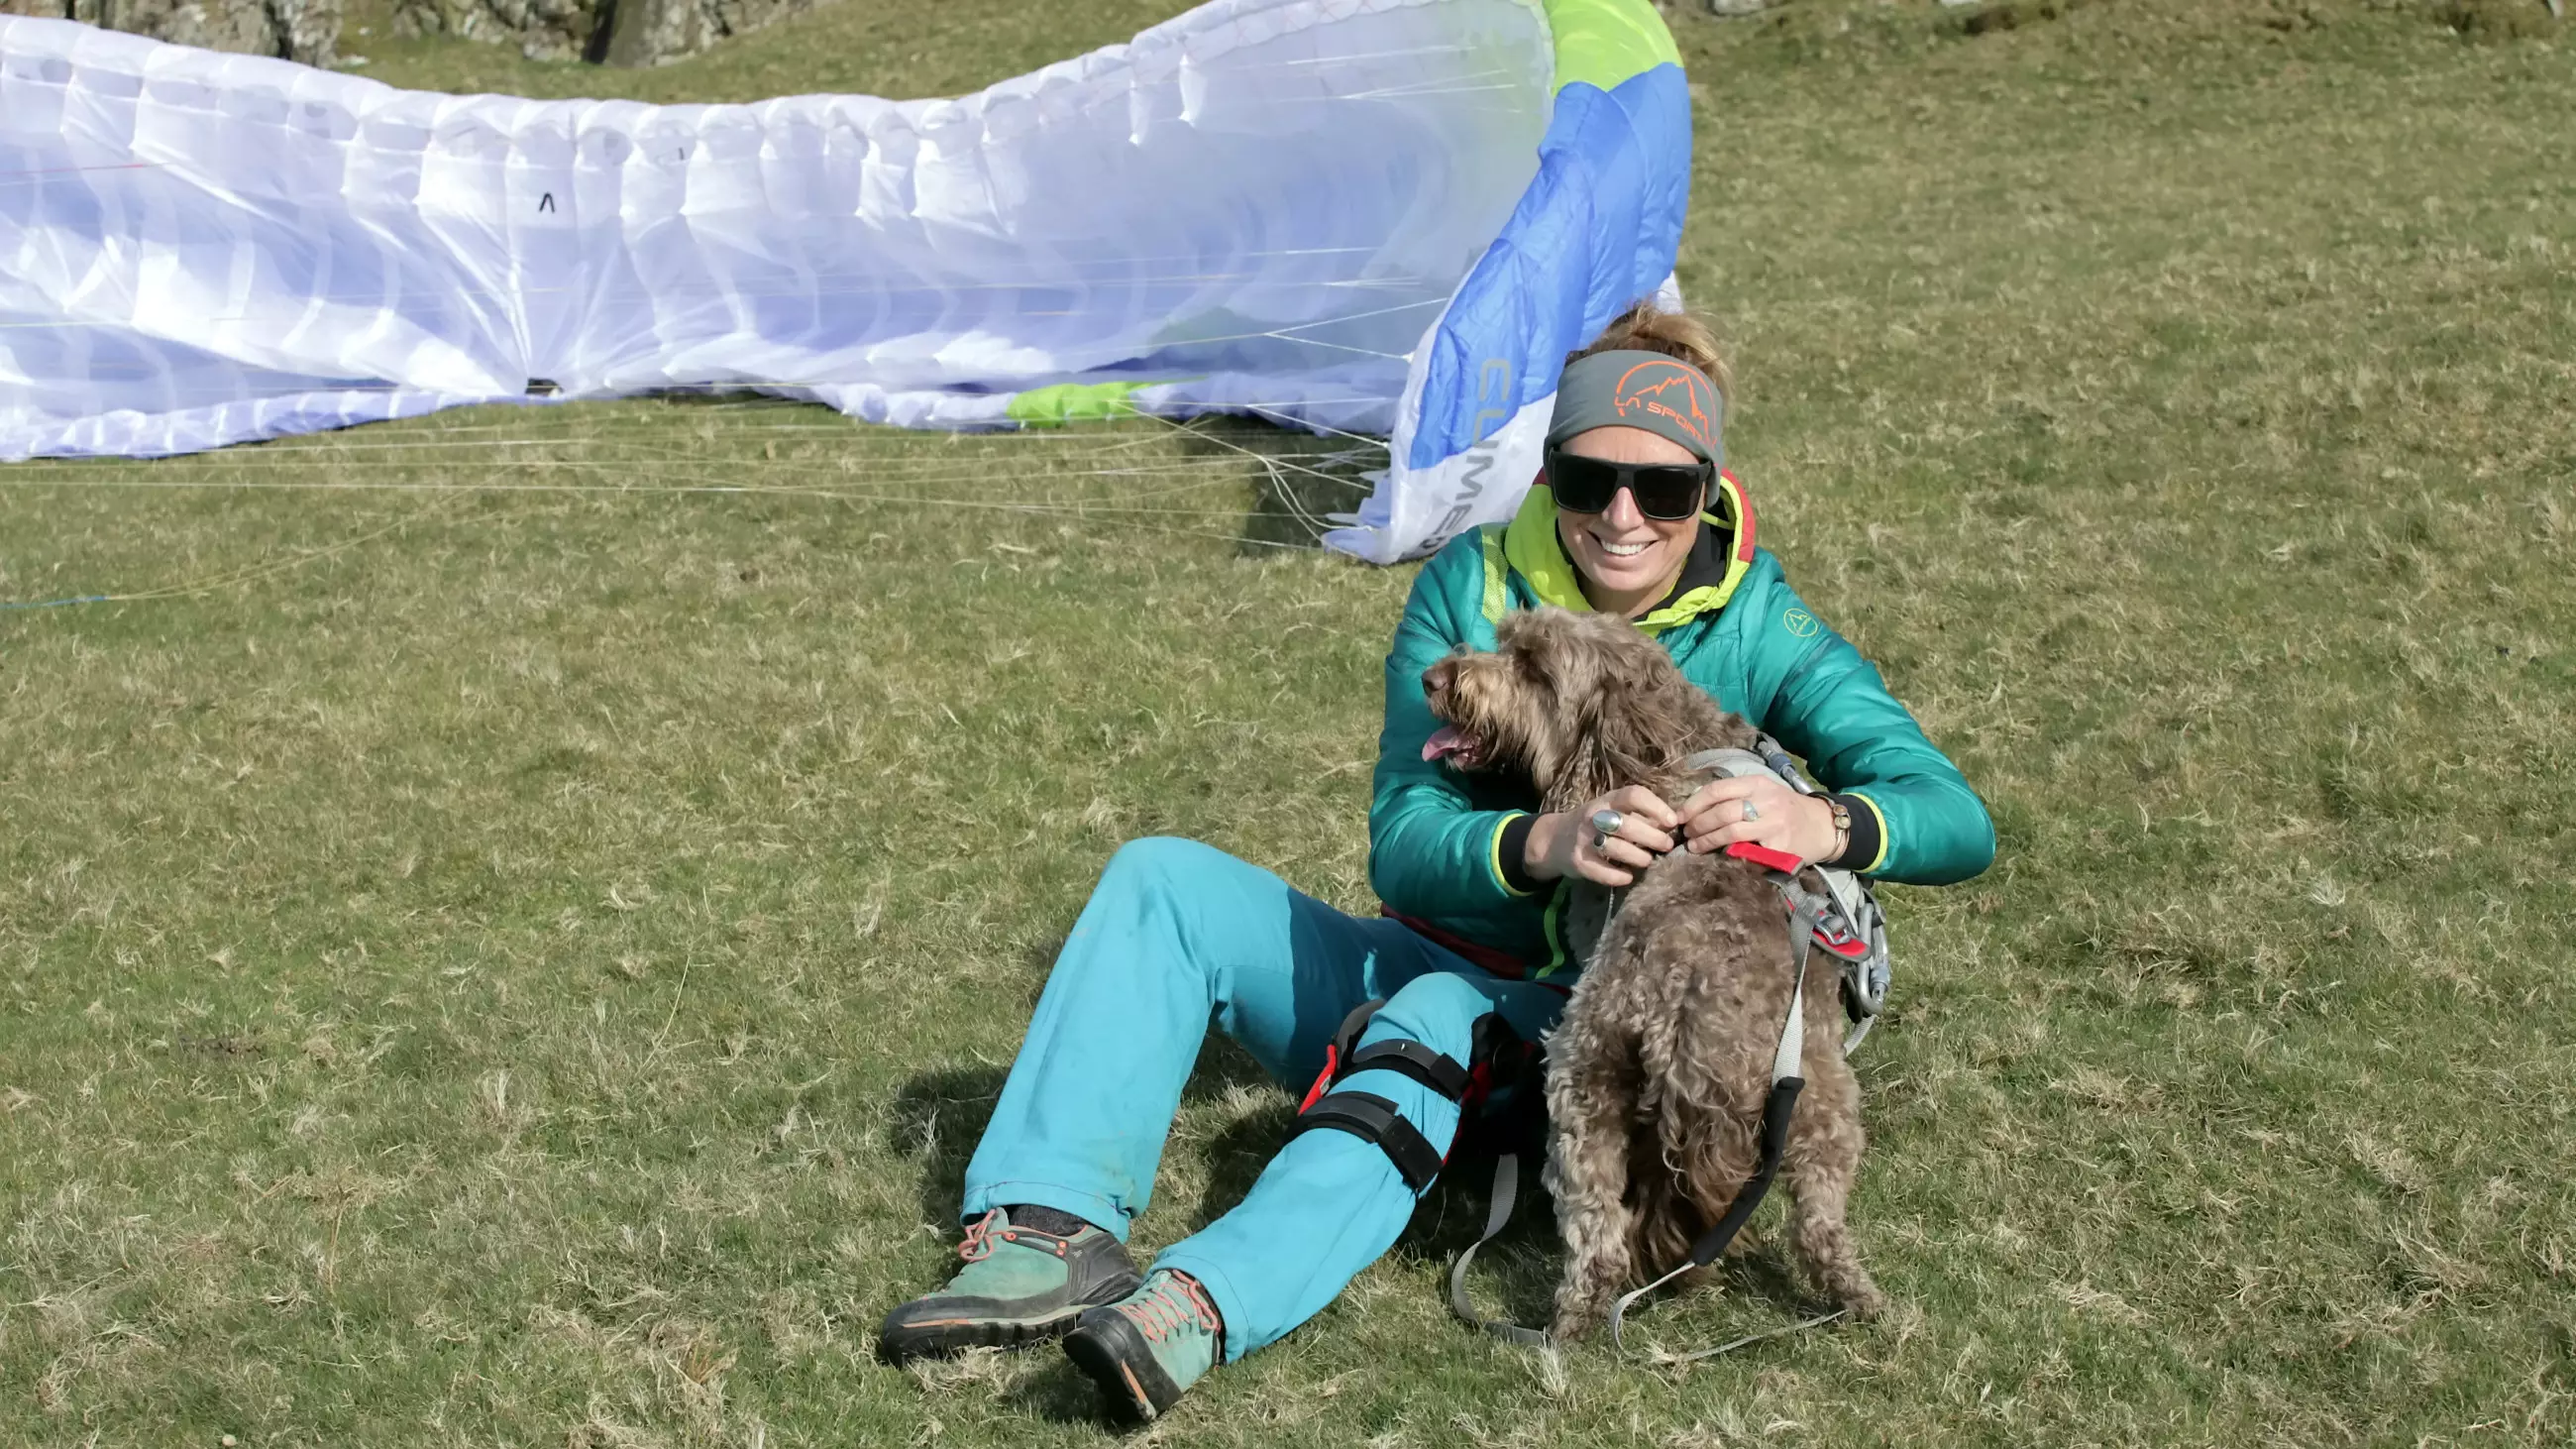 This Paragliding Dog Takes To The Skies With His Owners